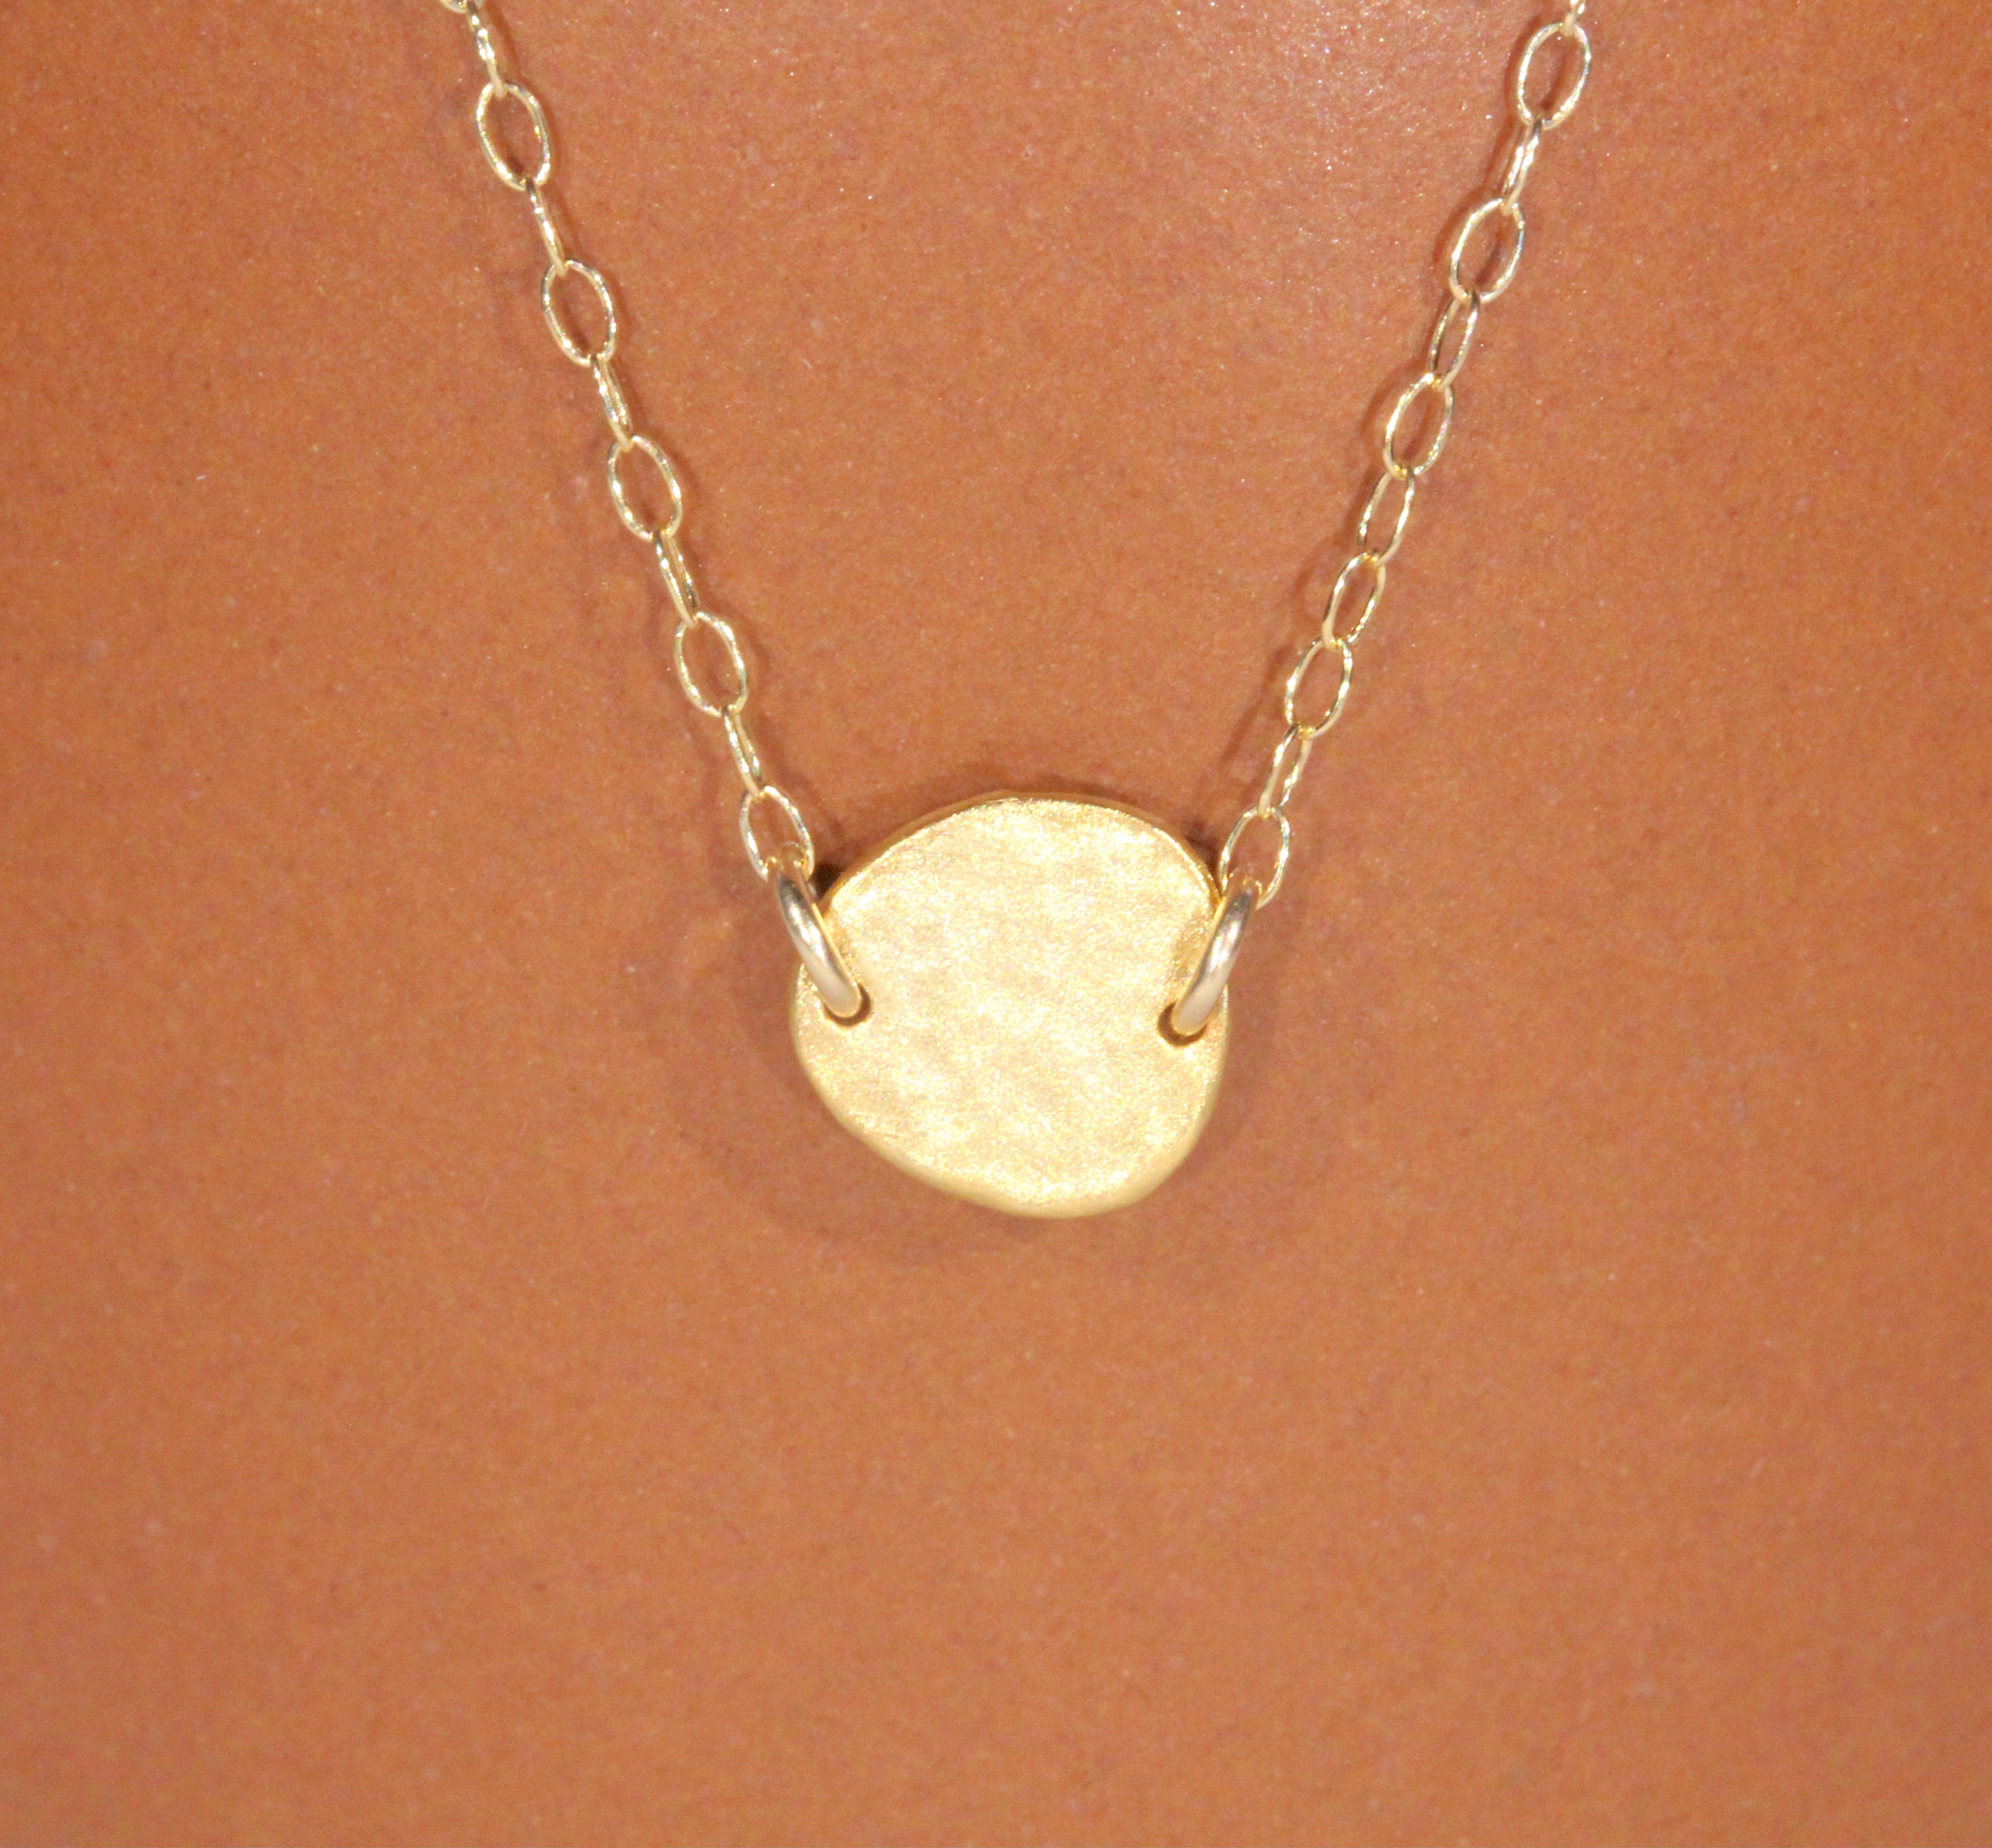 Hammered Gold Disk Necklace with Diamonds – Ananda Khalsa